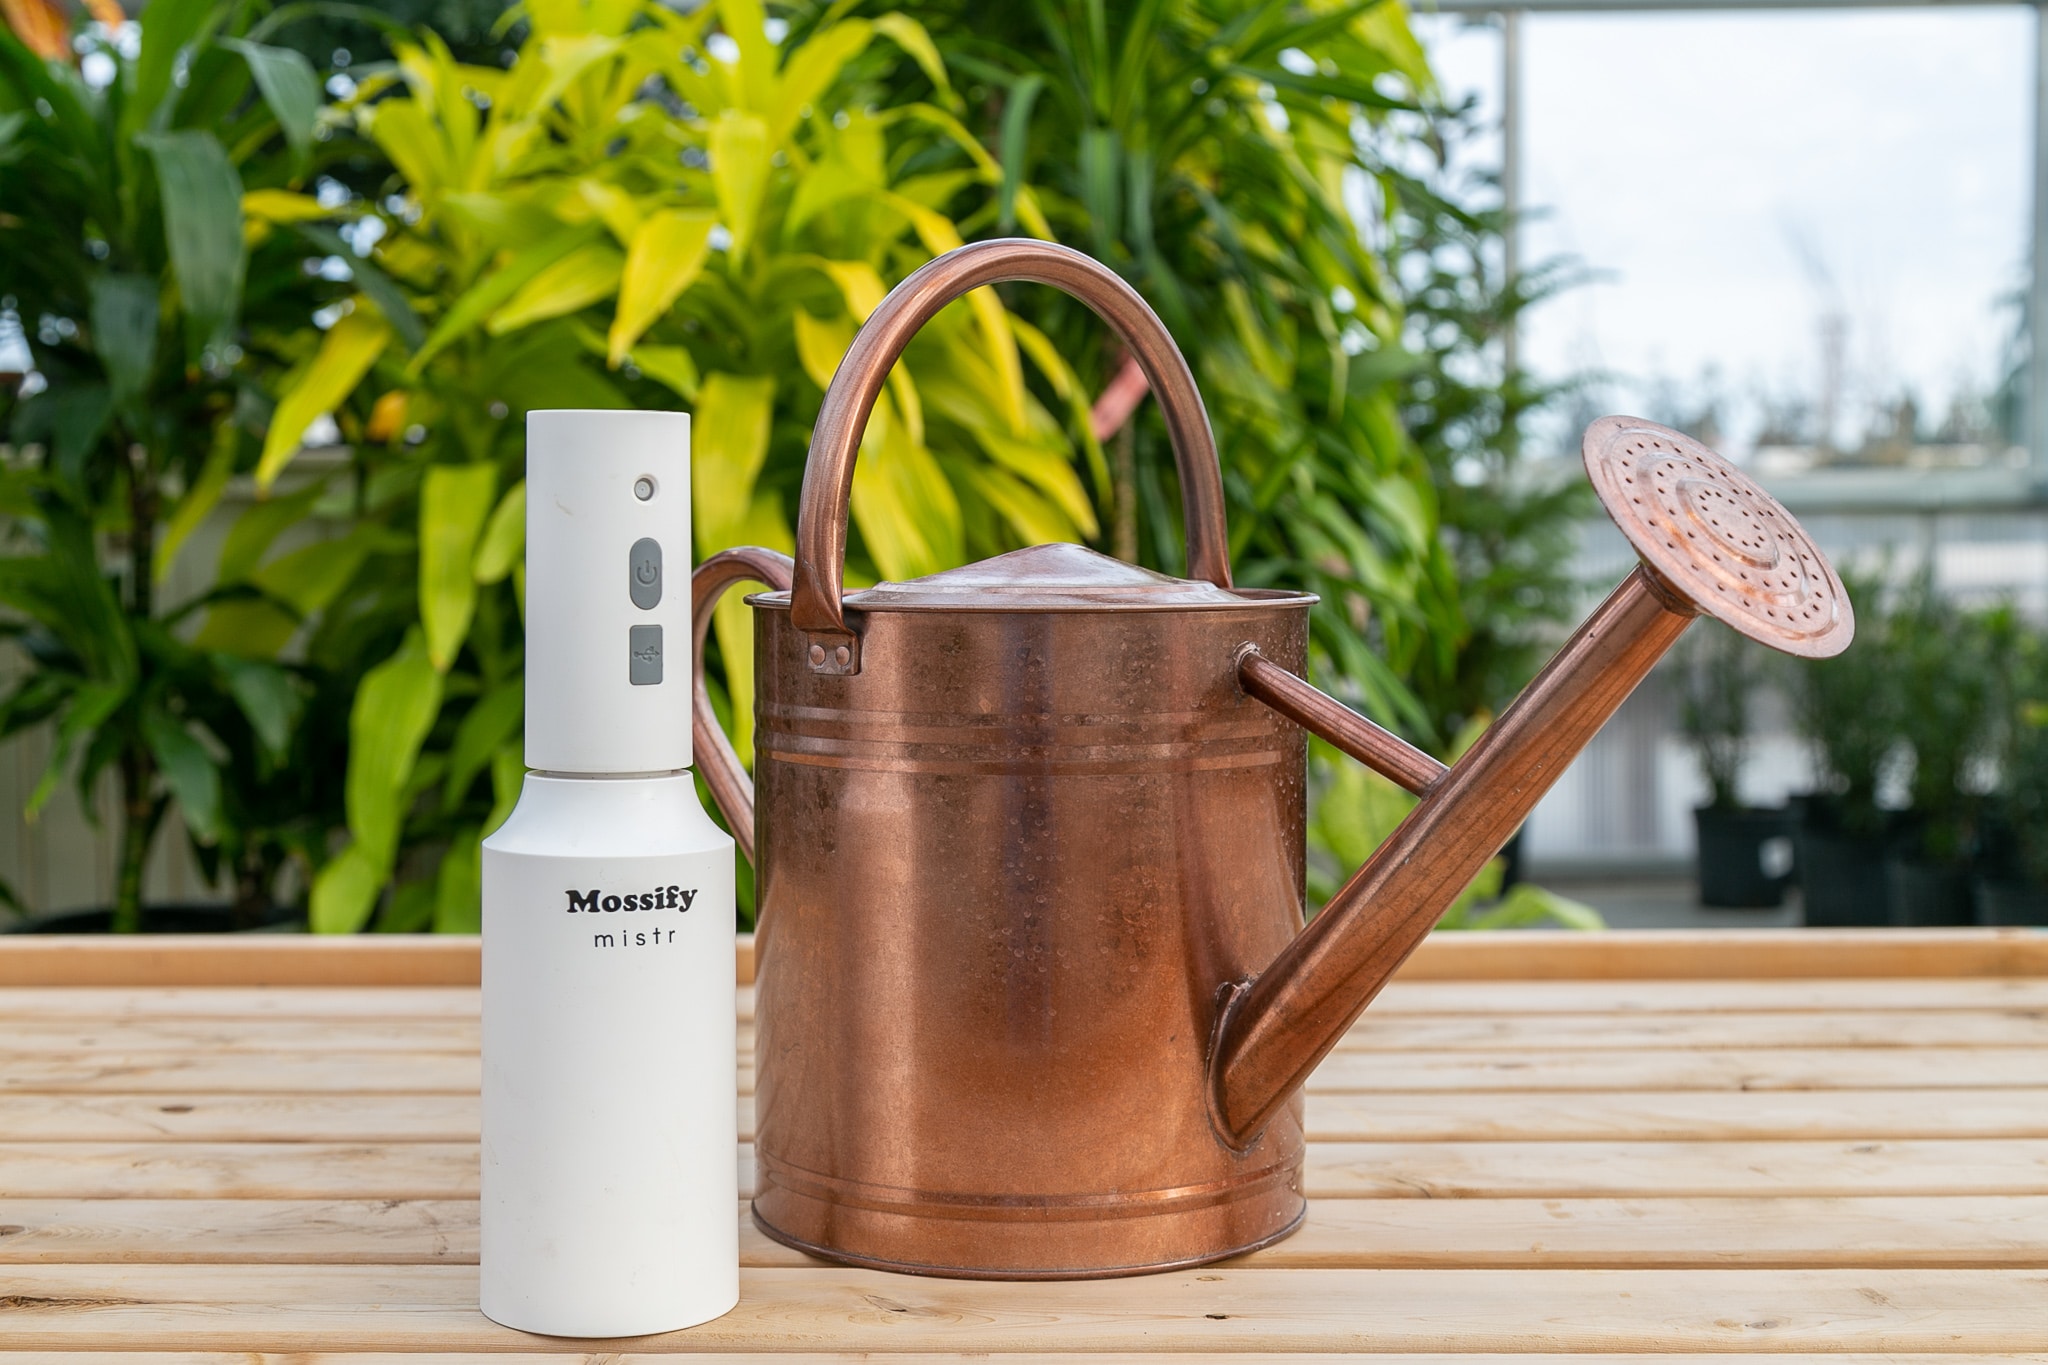 Image of Mossify Mistr and bronze watering can